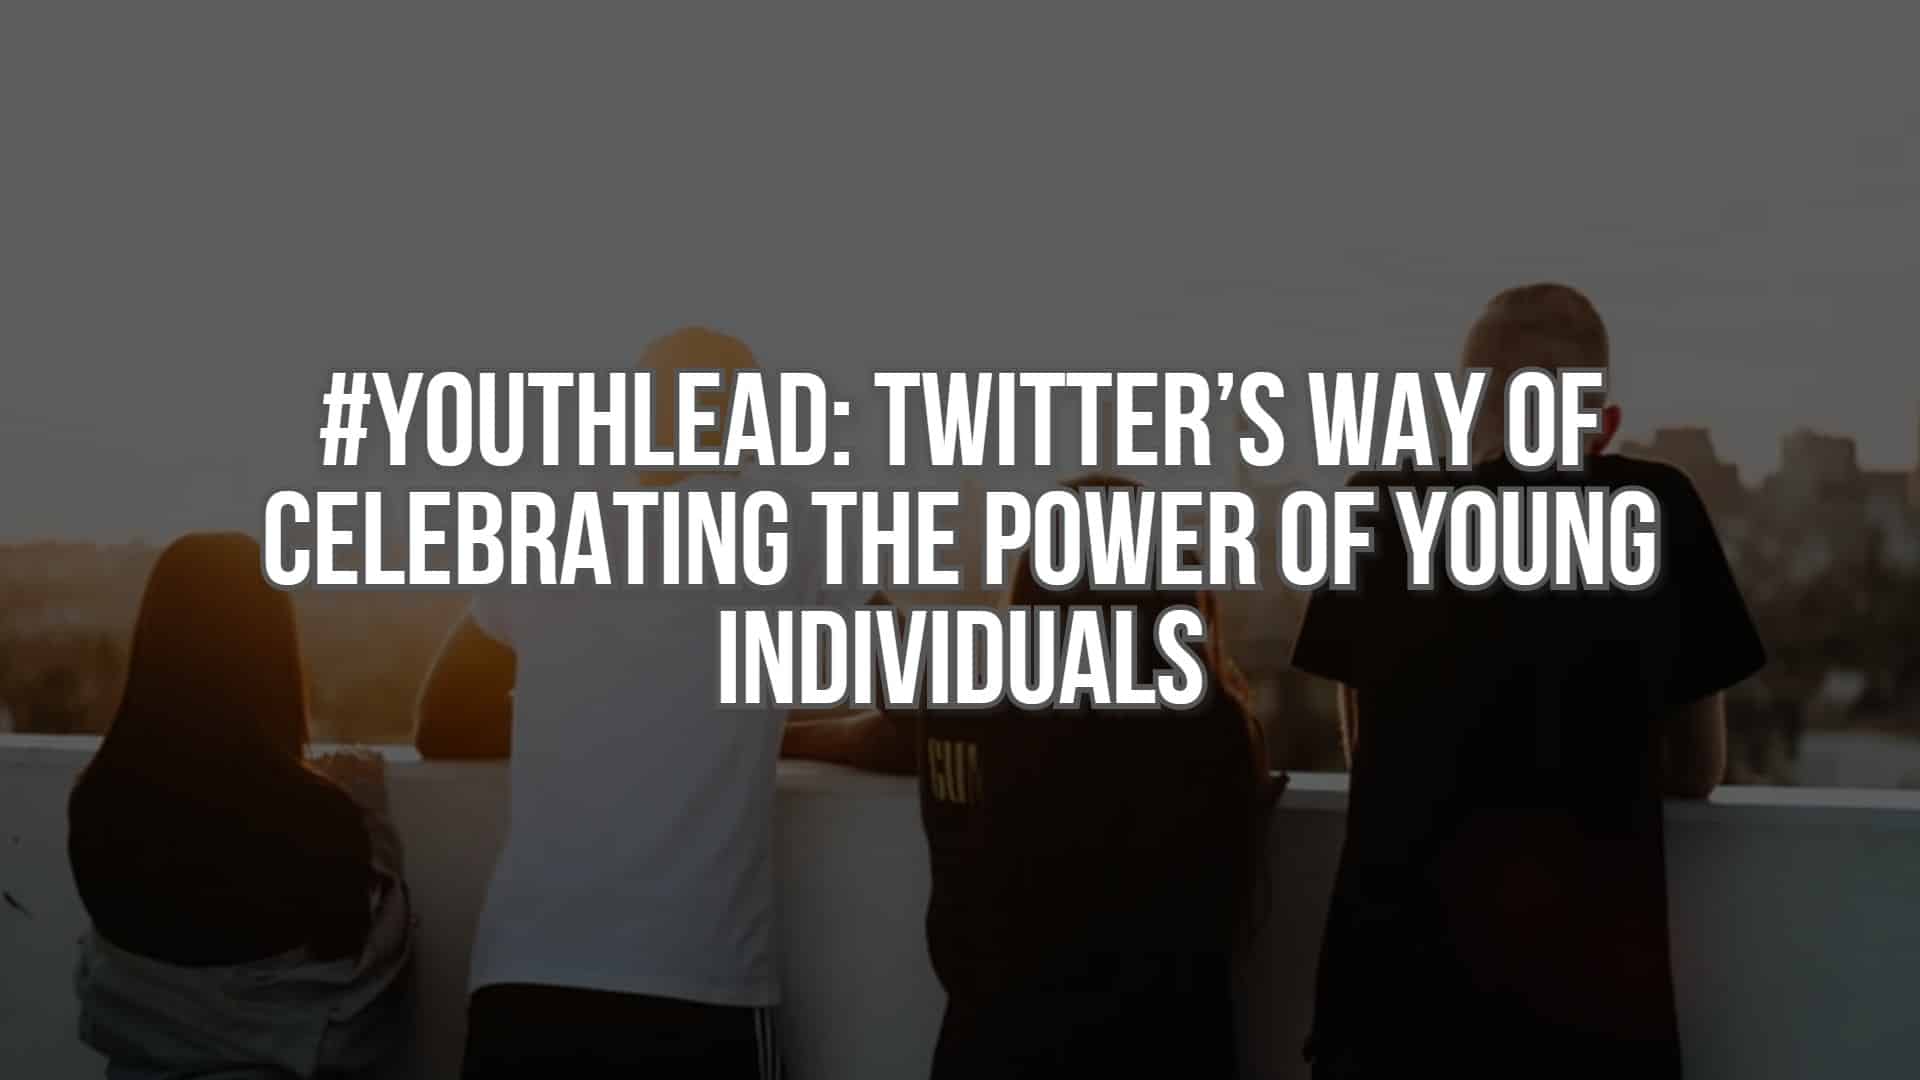 #YouthLead: Twitter’s Way of Celebrating the Power of Young Individuals